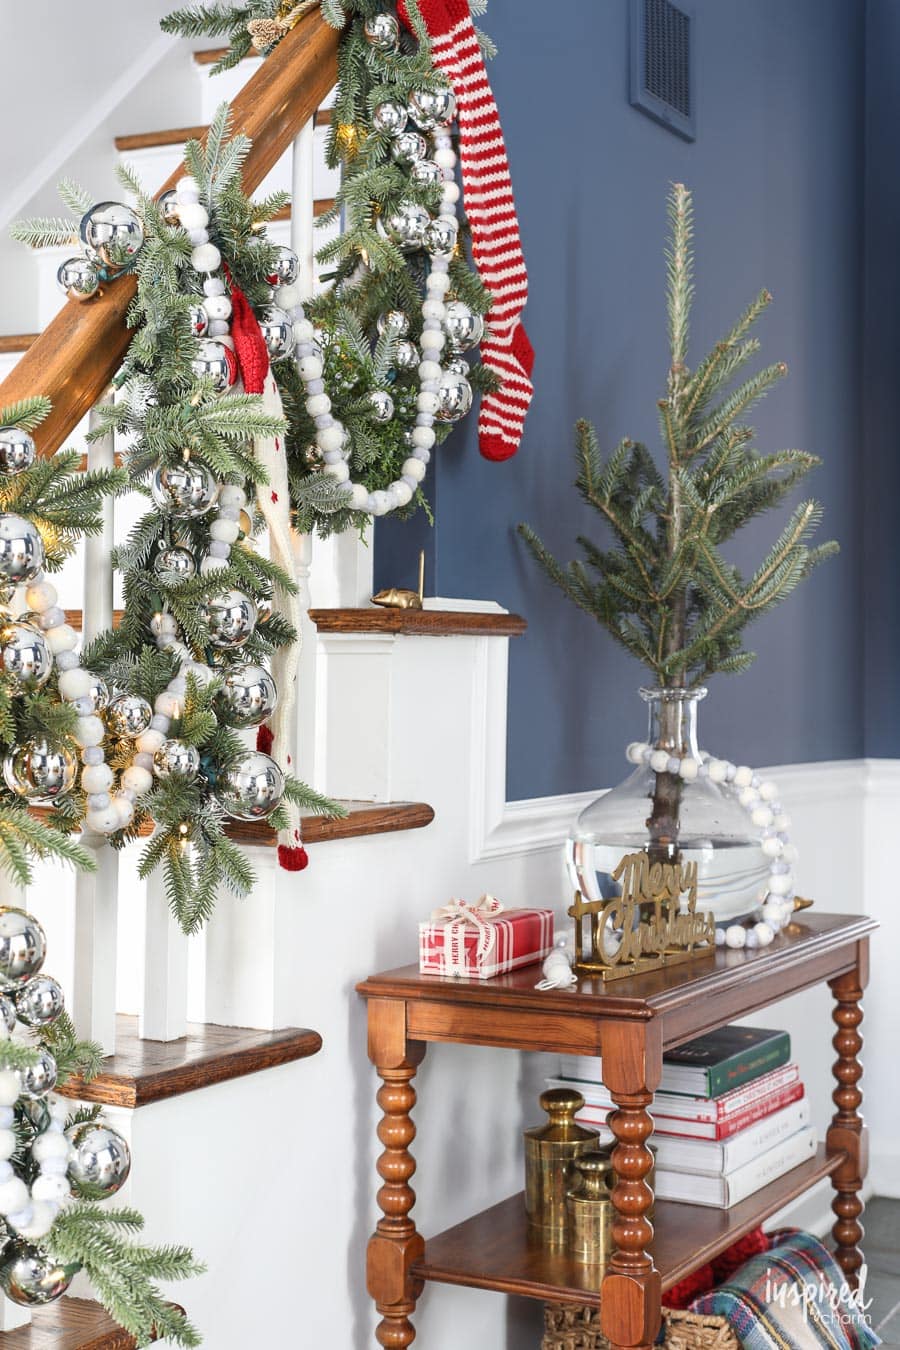 Christmas at Bayberry House - Holiday Home Tour